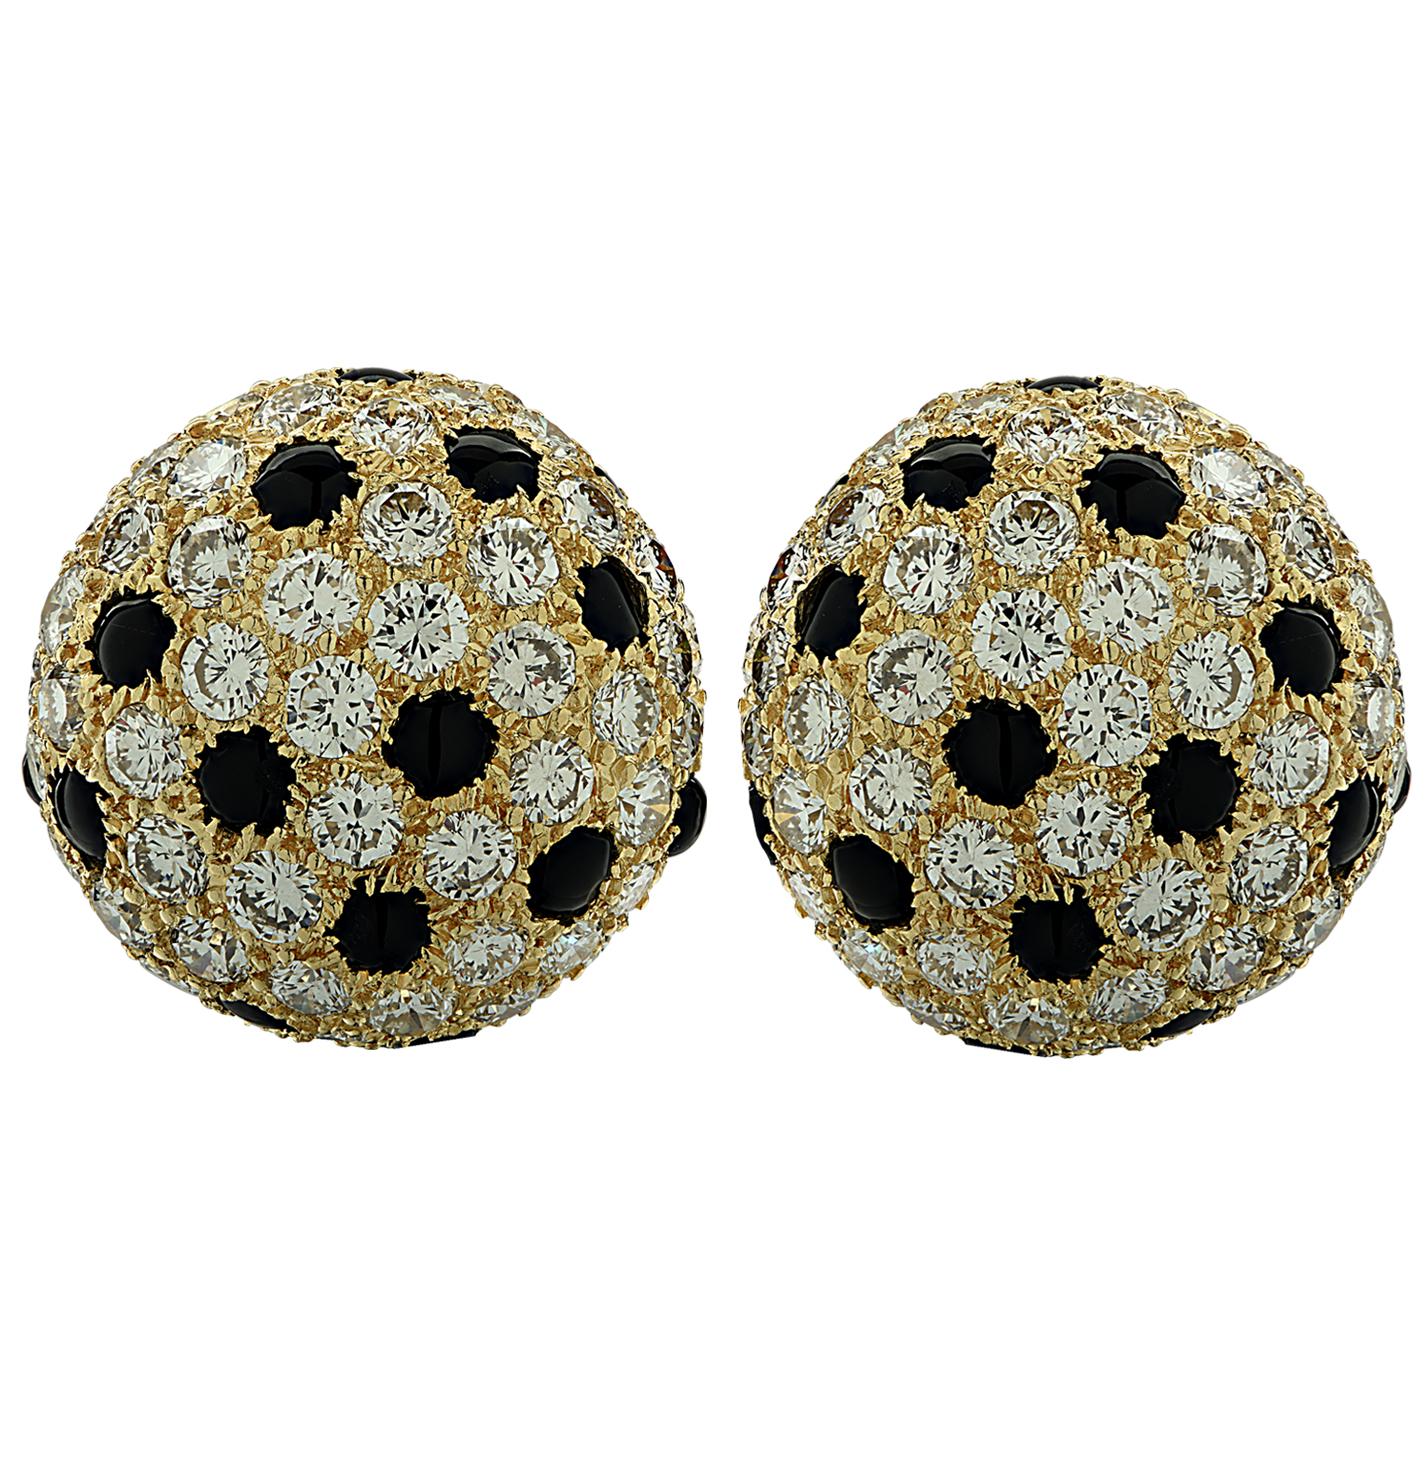 Modern Cartier Panthere Diamond and Onyx Earrings